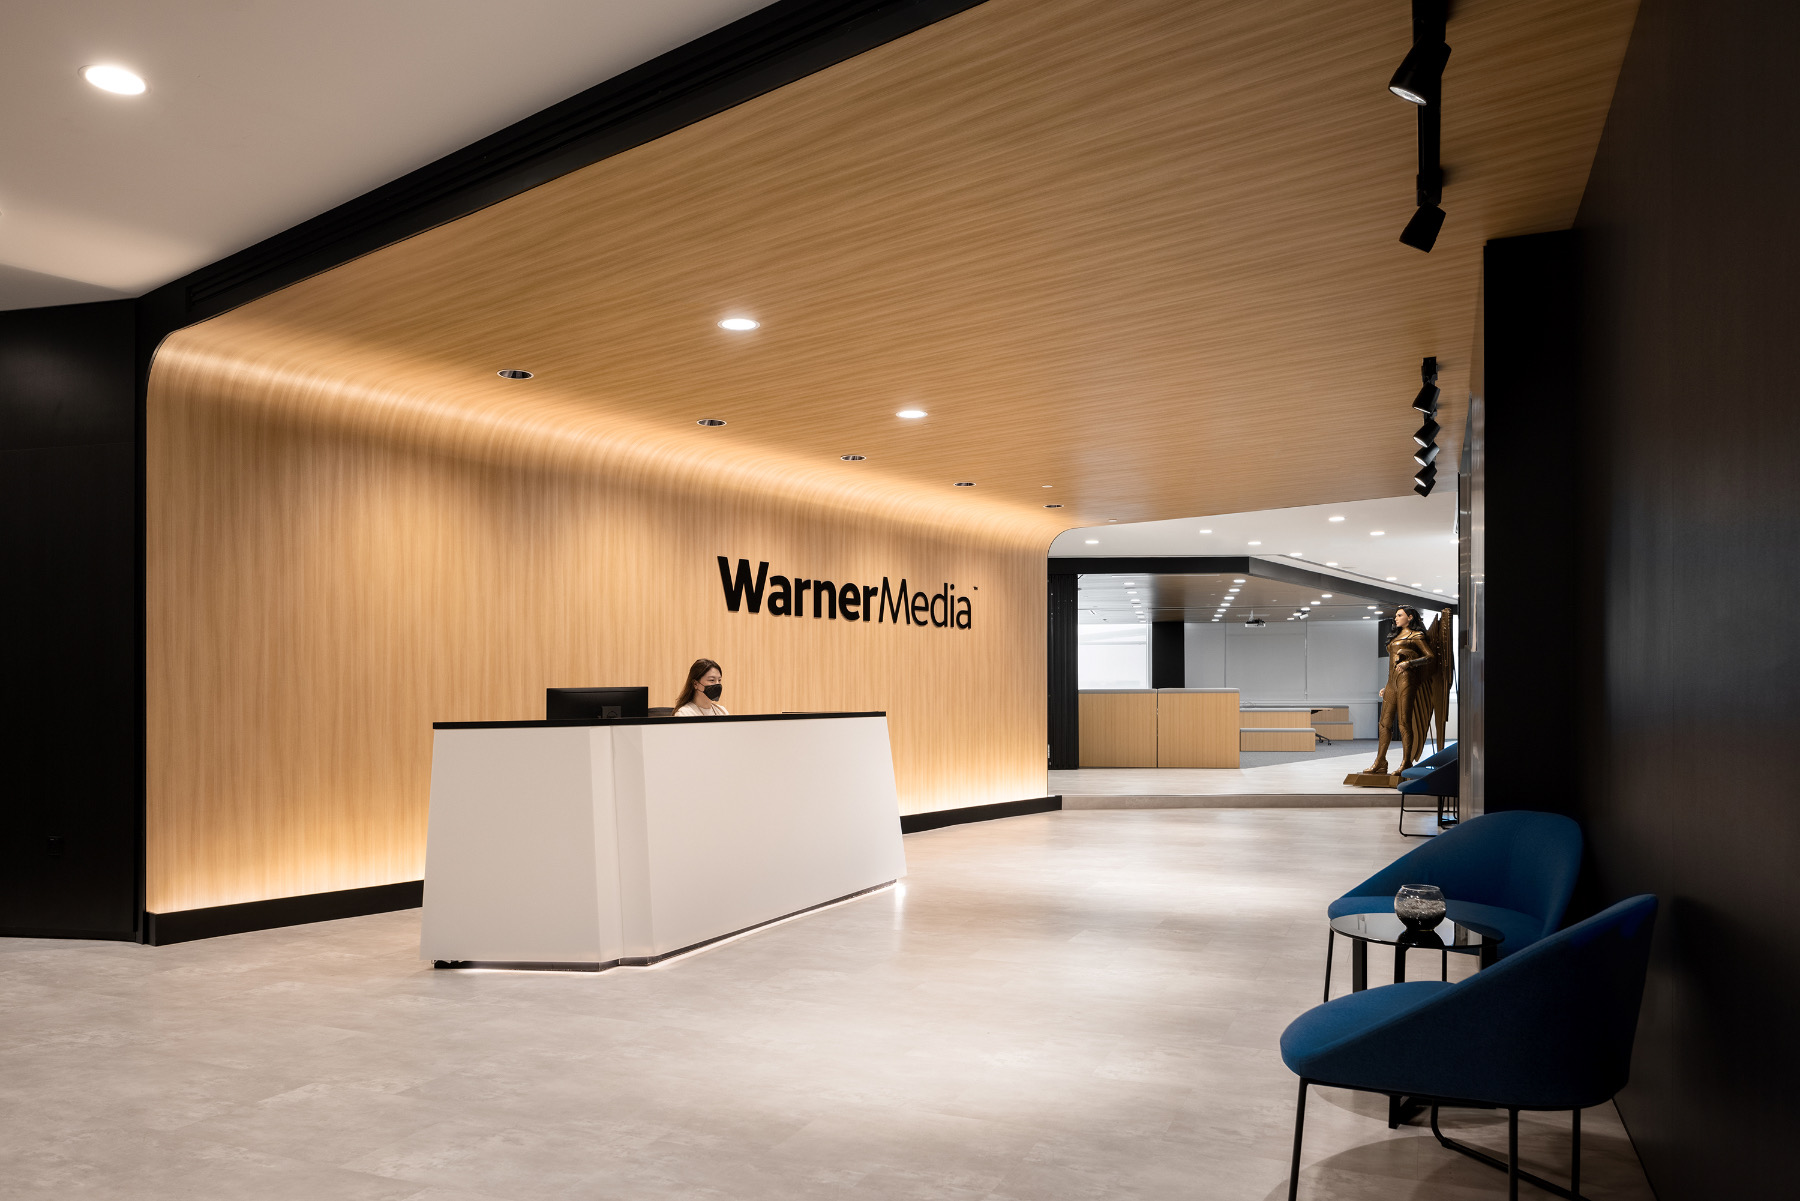 A Tour of WarnerMedia Group’s New Singapore Office